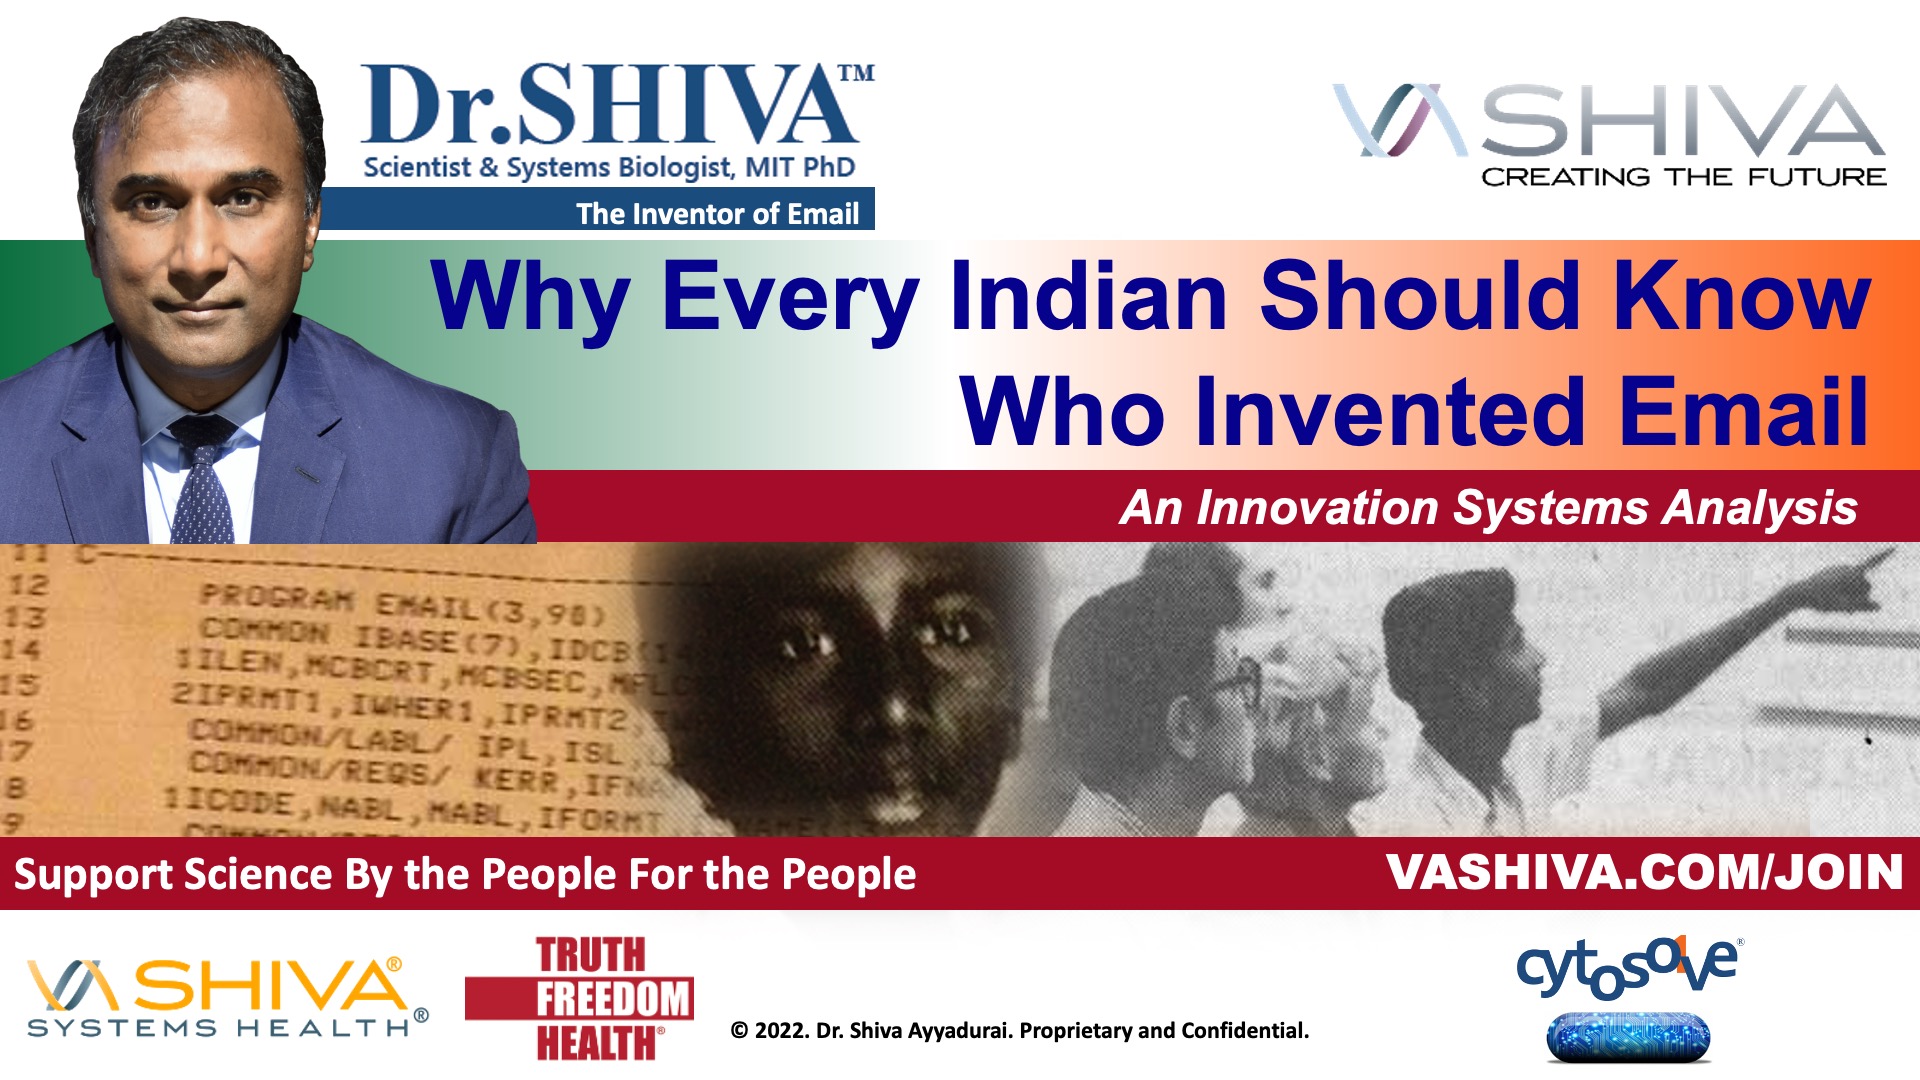 Dr.SHIVA INTERVIEW: This Is Why Every Indian Should Know Who Invented Email